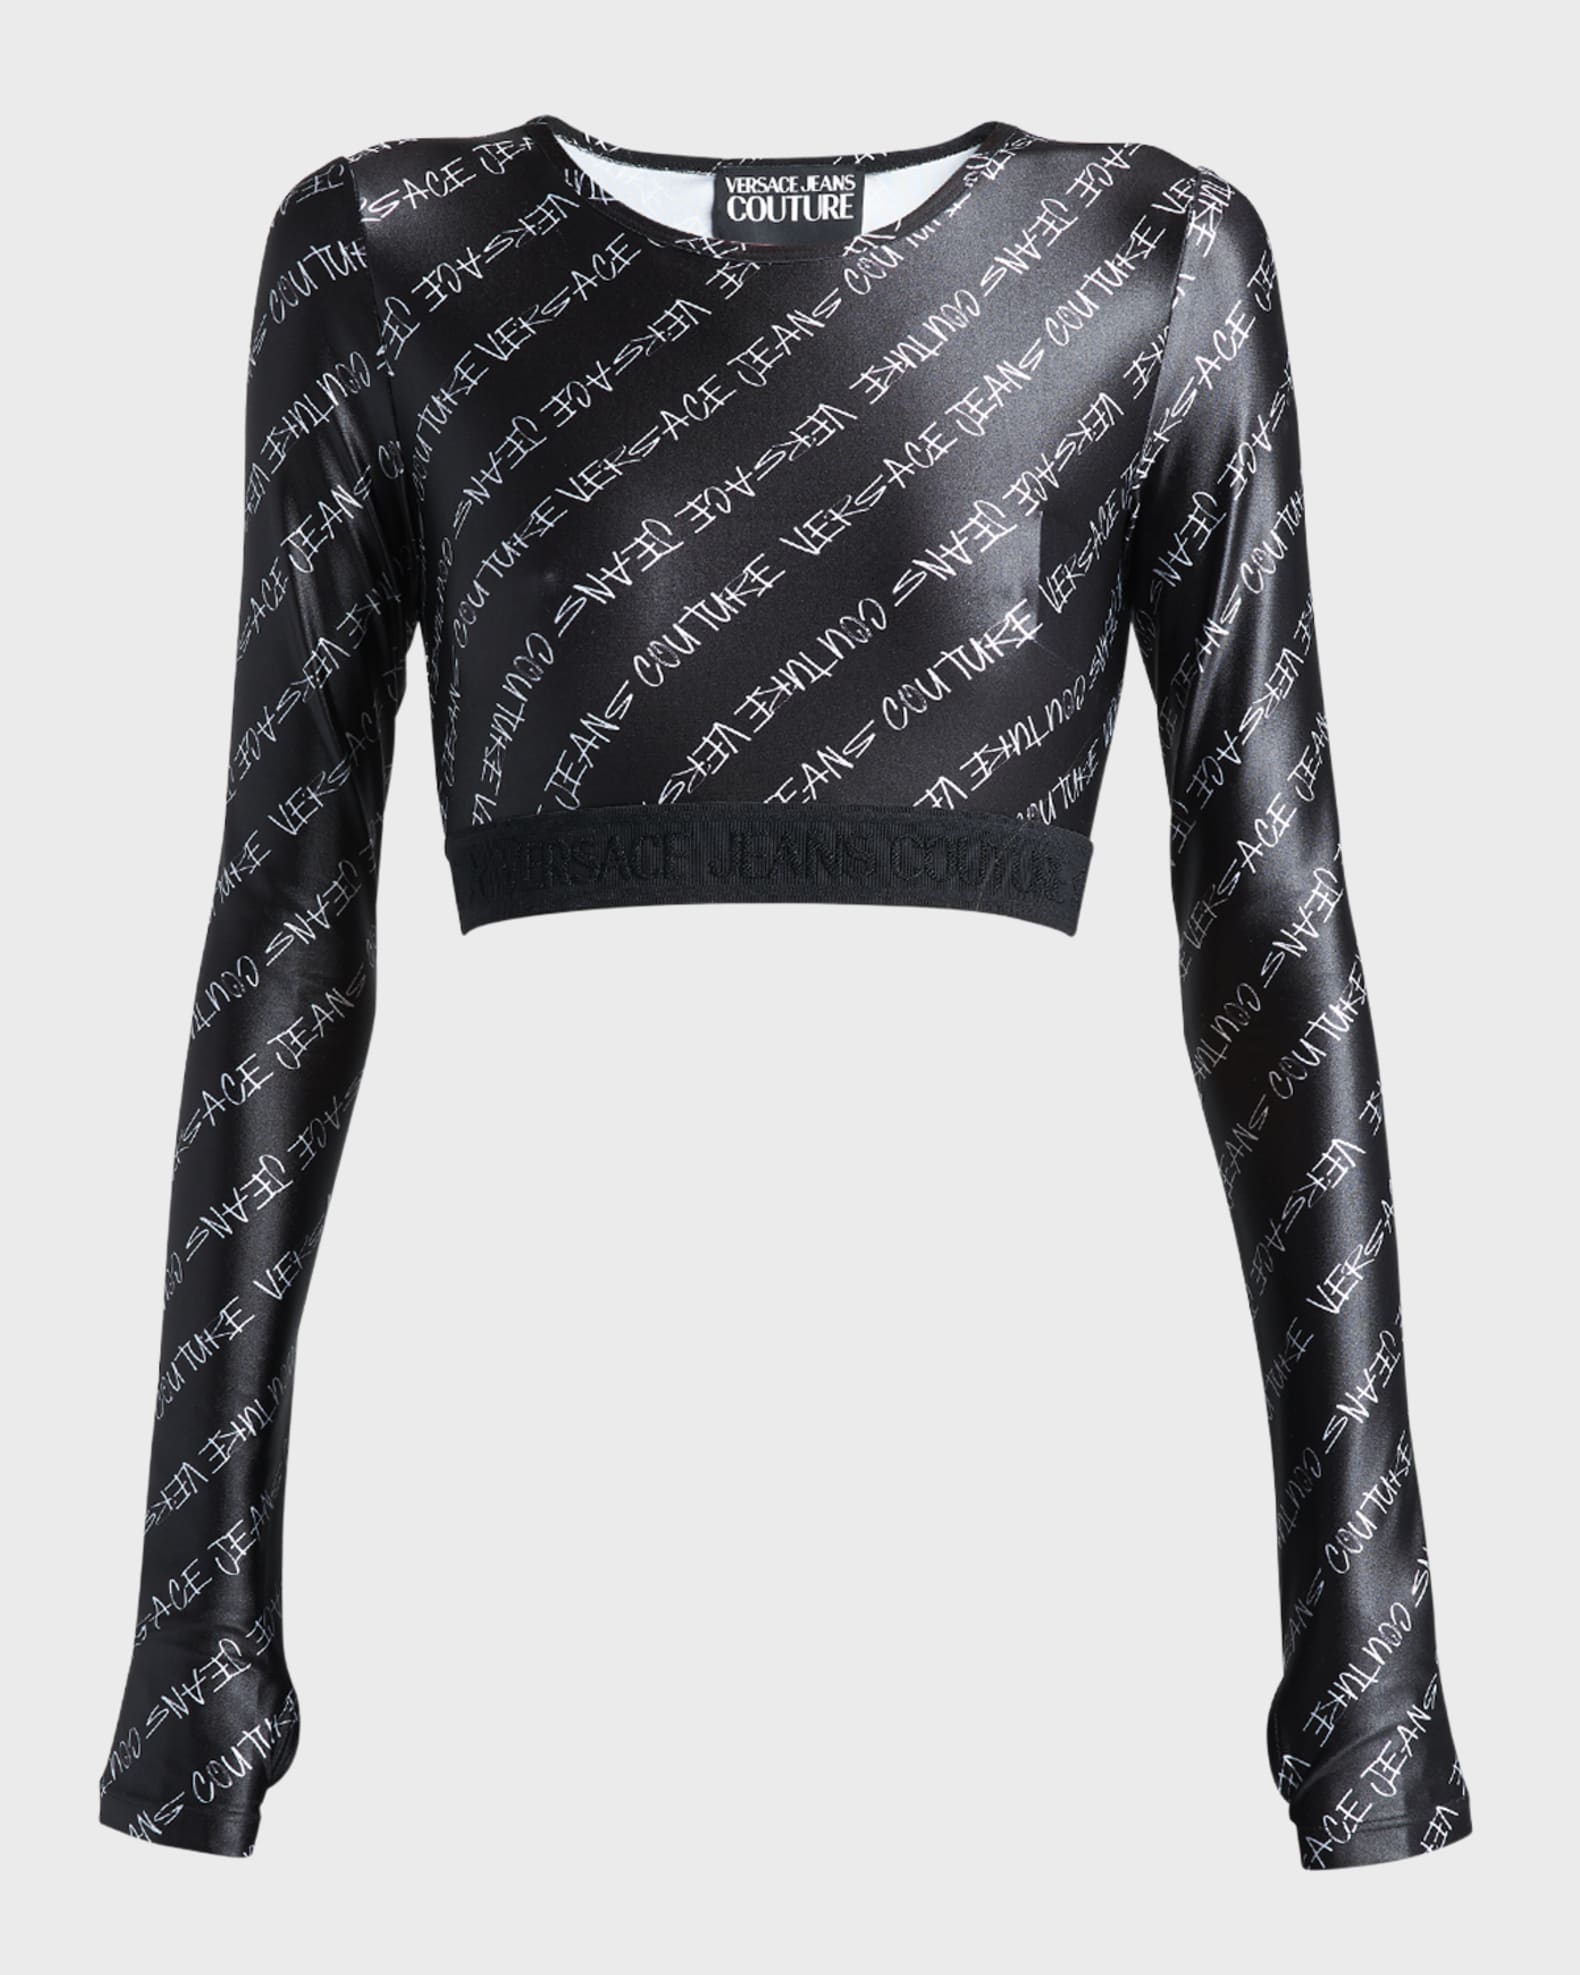 Versace Jeans Couture Long Sleeve Logo-Print Crop Top